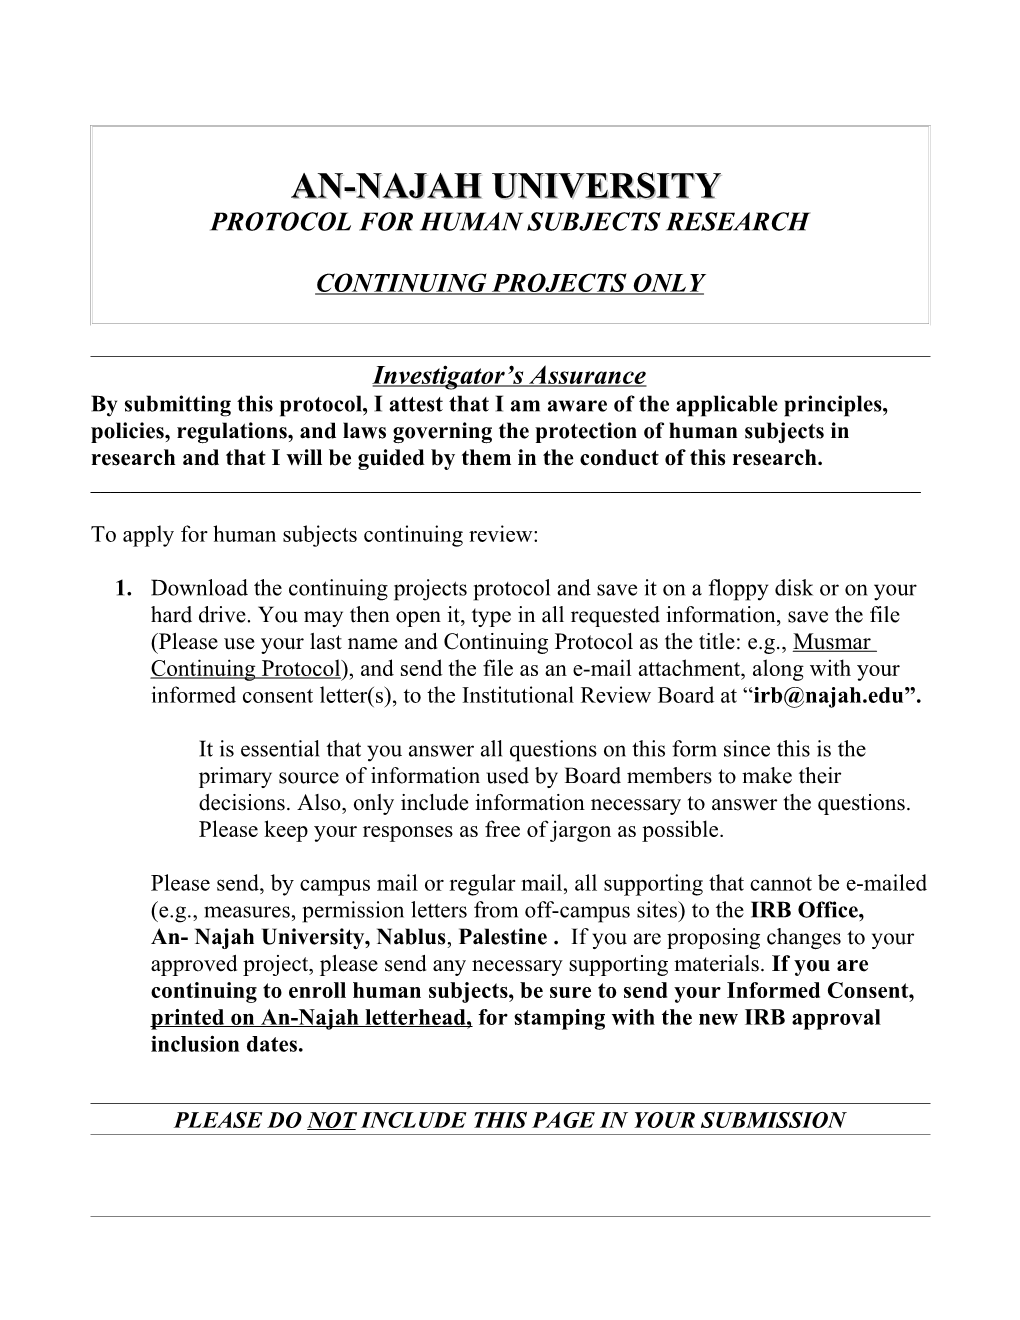 Protocol for Human Subjects Research